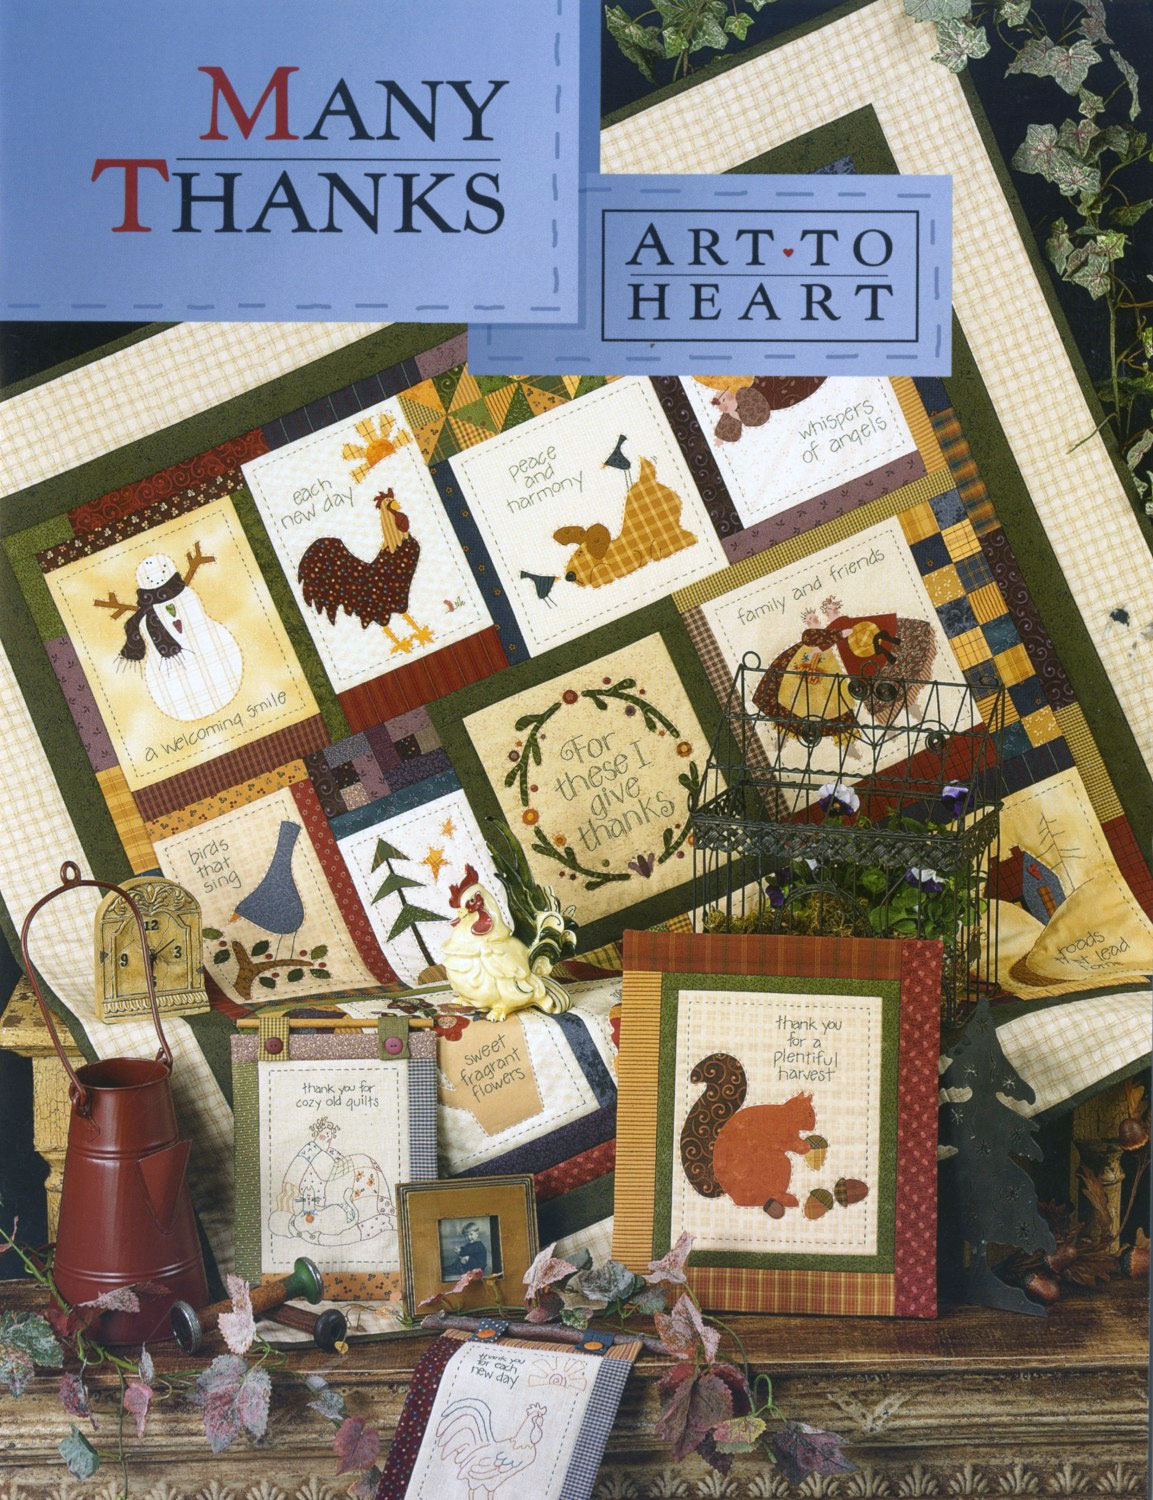 Many-Thanks-sewing-pattern-book-Art-To-Heart-front